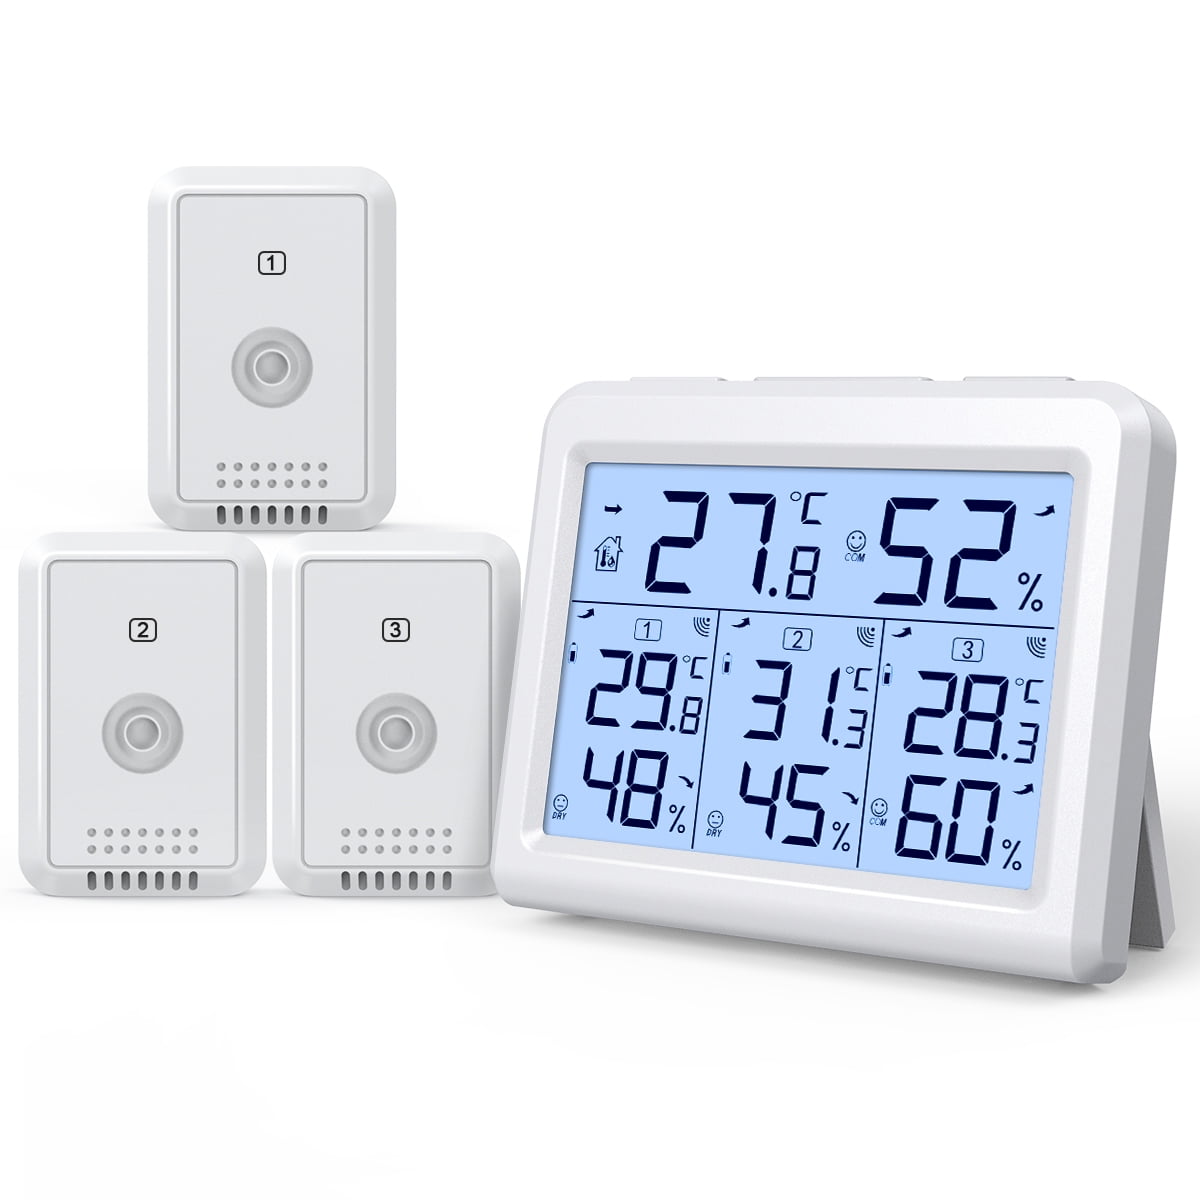 3 Sensor Digital LCD Thermometer Hygrometer Home Outdoor Temperature @ Humidity 